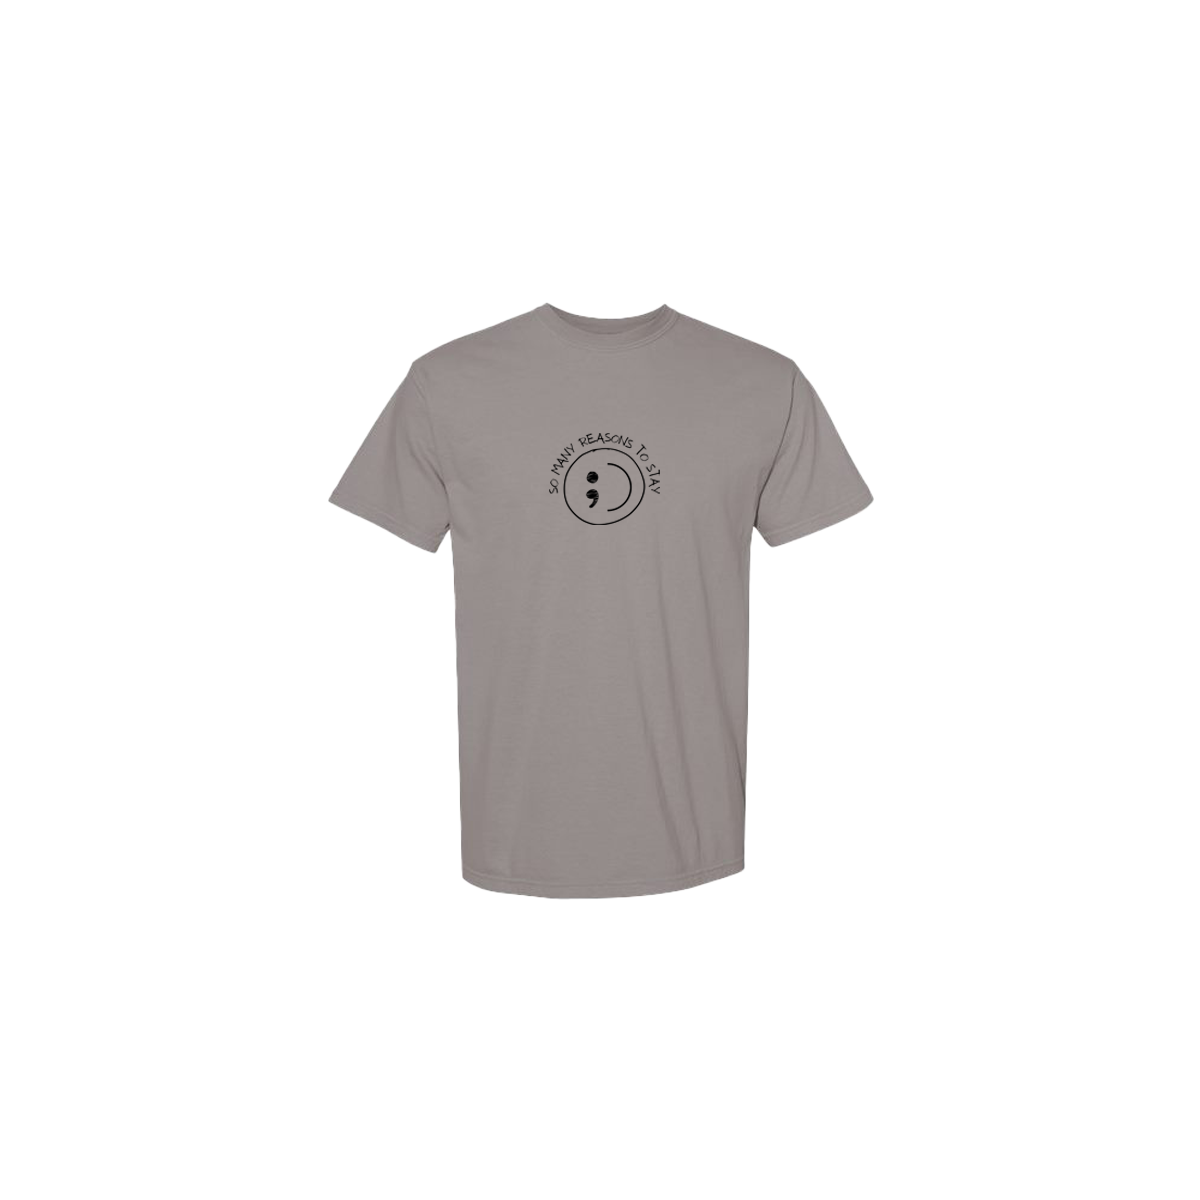 So Many Reasons to Stay Embroidered Grey Tshirt - Mental Health Awareness Clothing